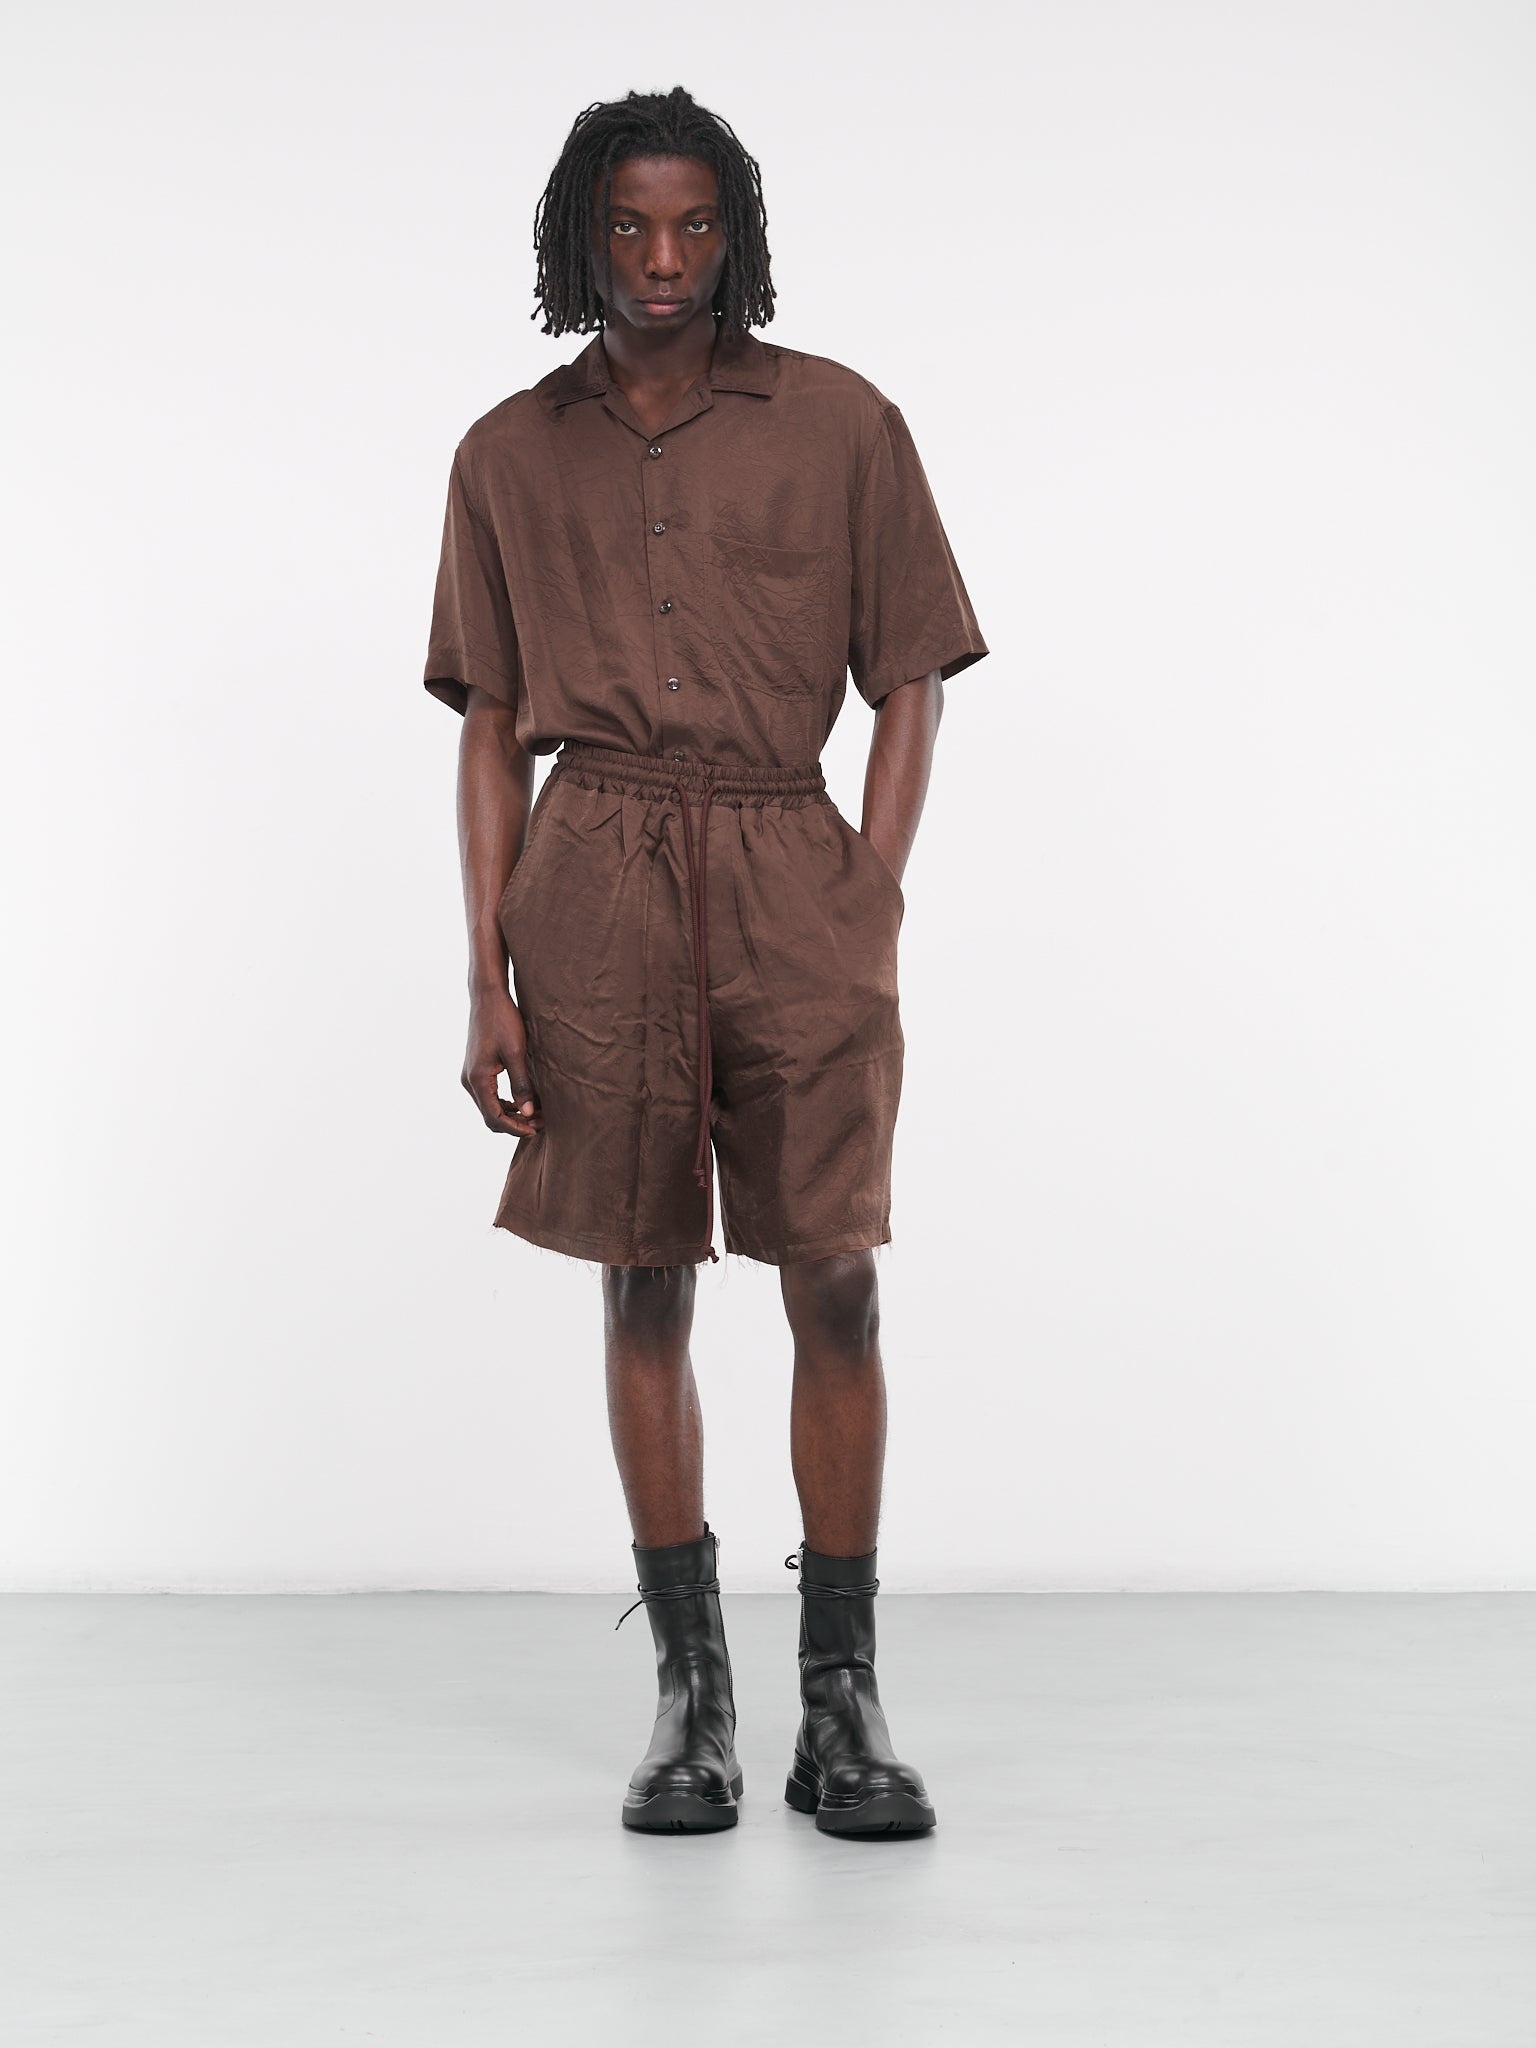 Song For The Mute crinkled short-sleeve shirt - Brown